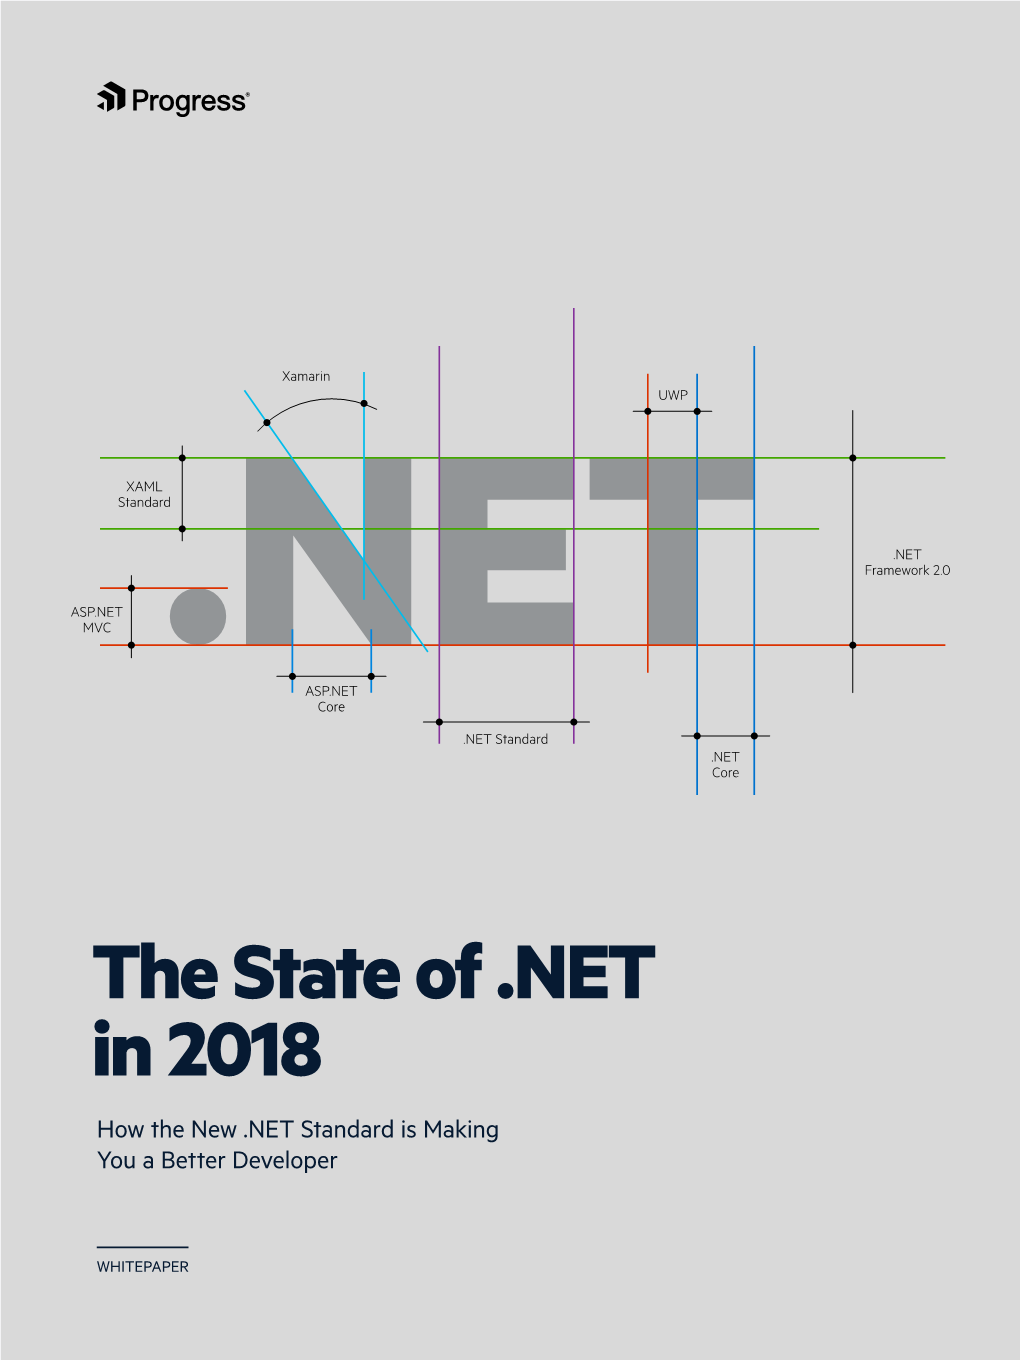 The State of .NET in 2018